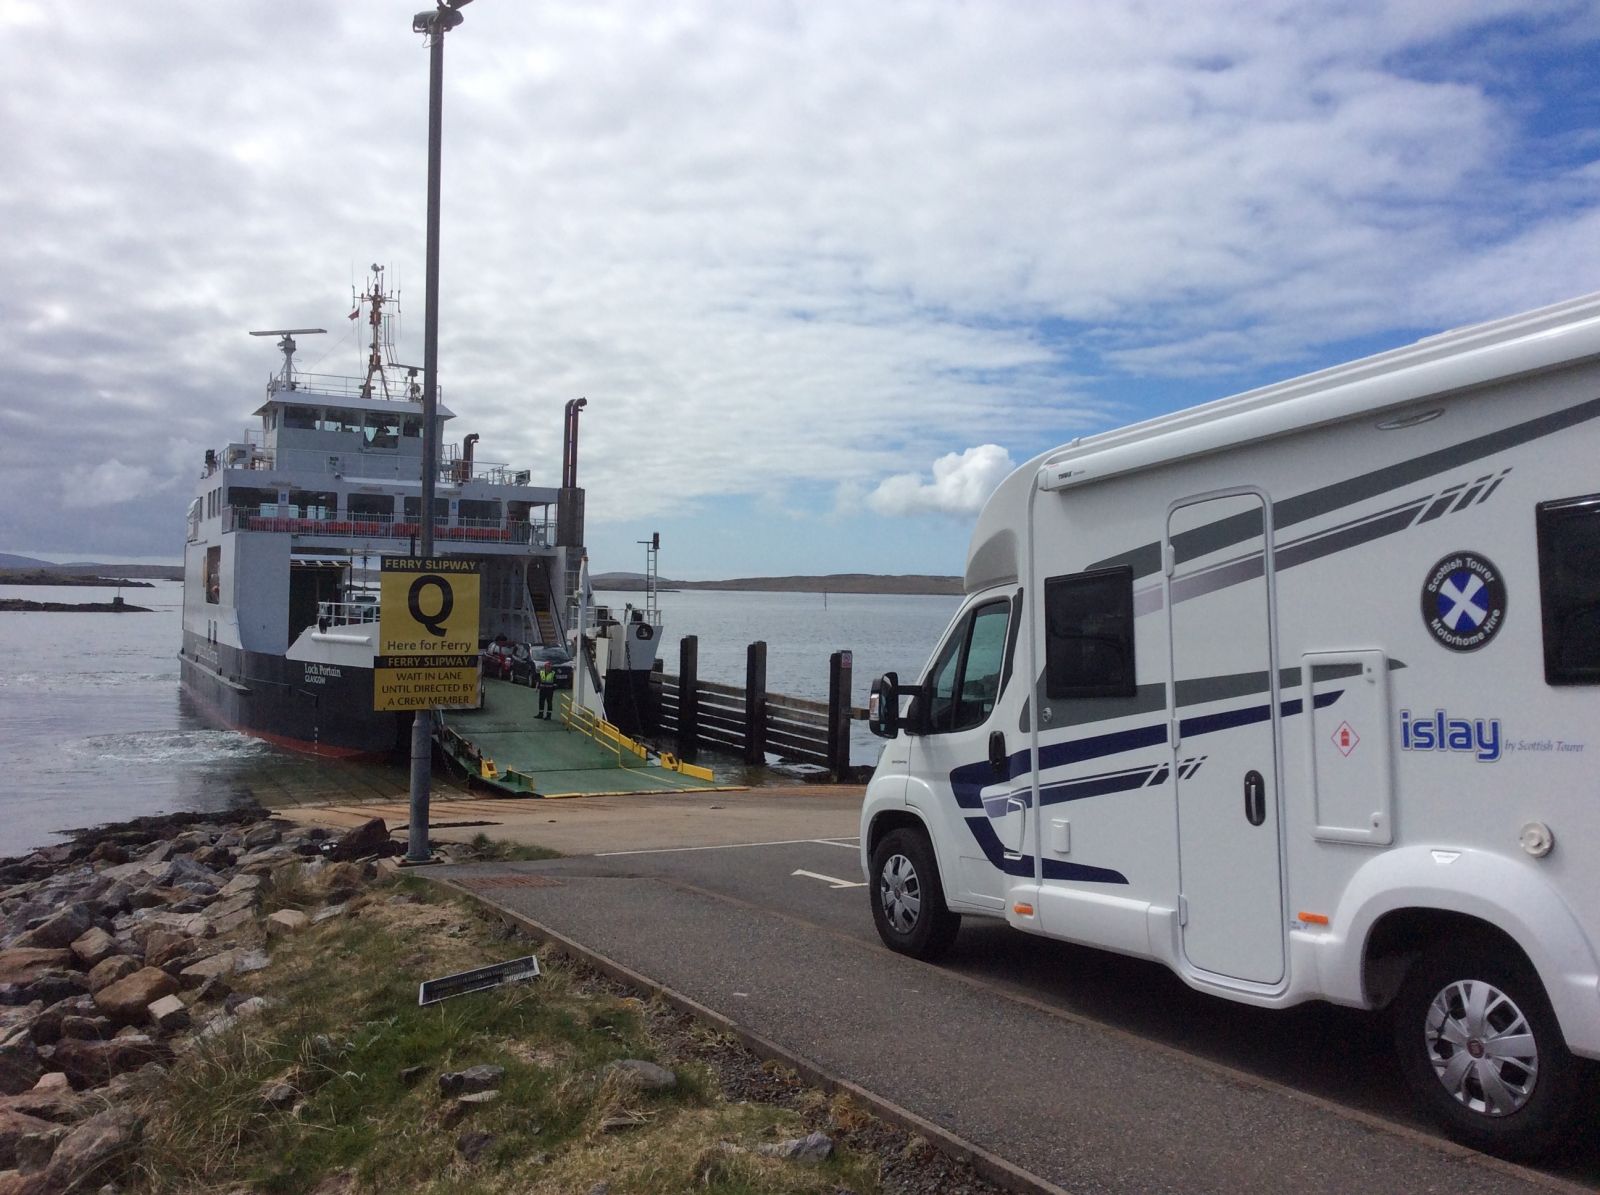 Islay by scottish tourer at the ferry port